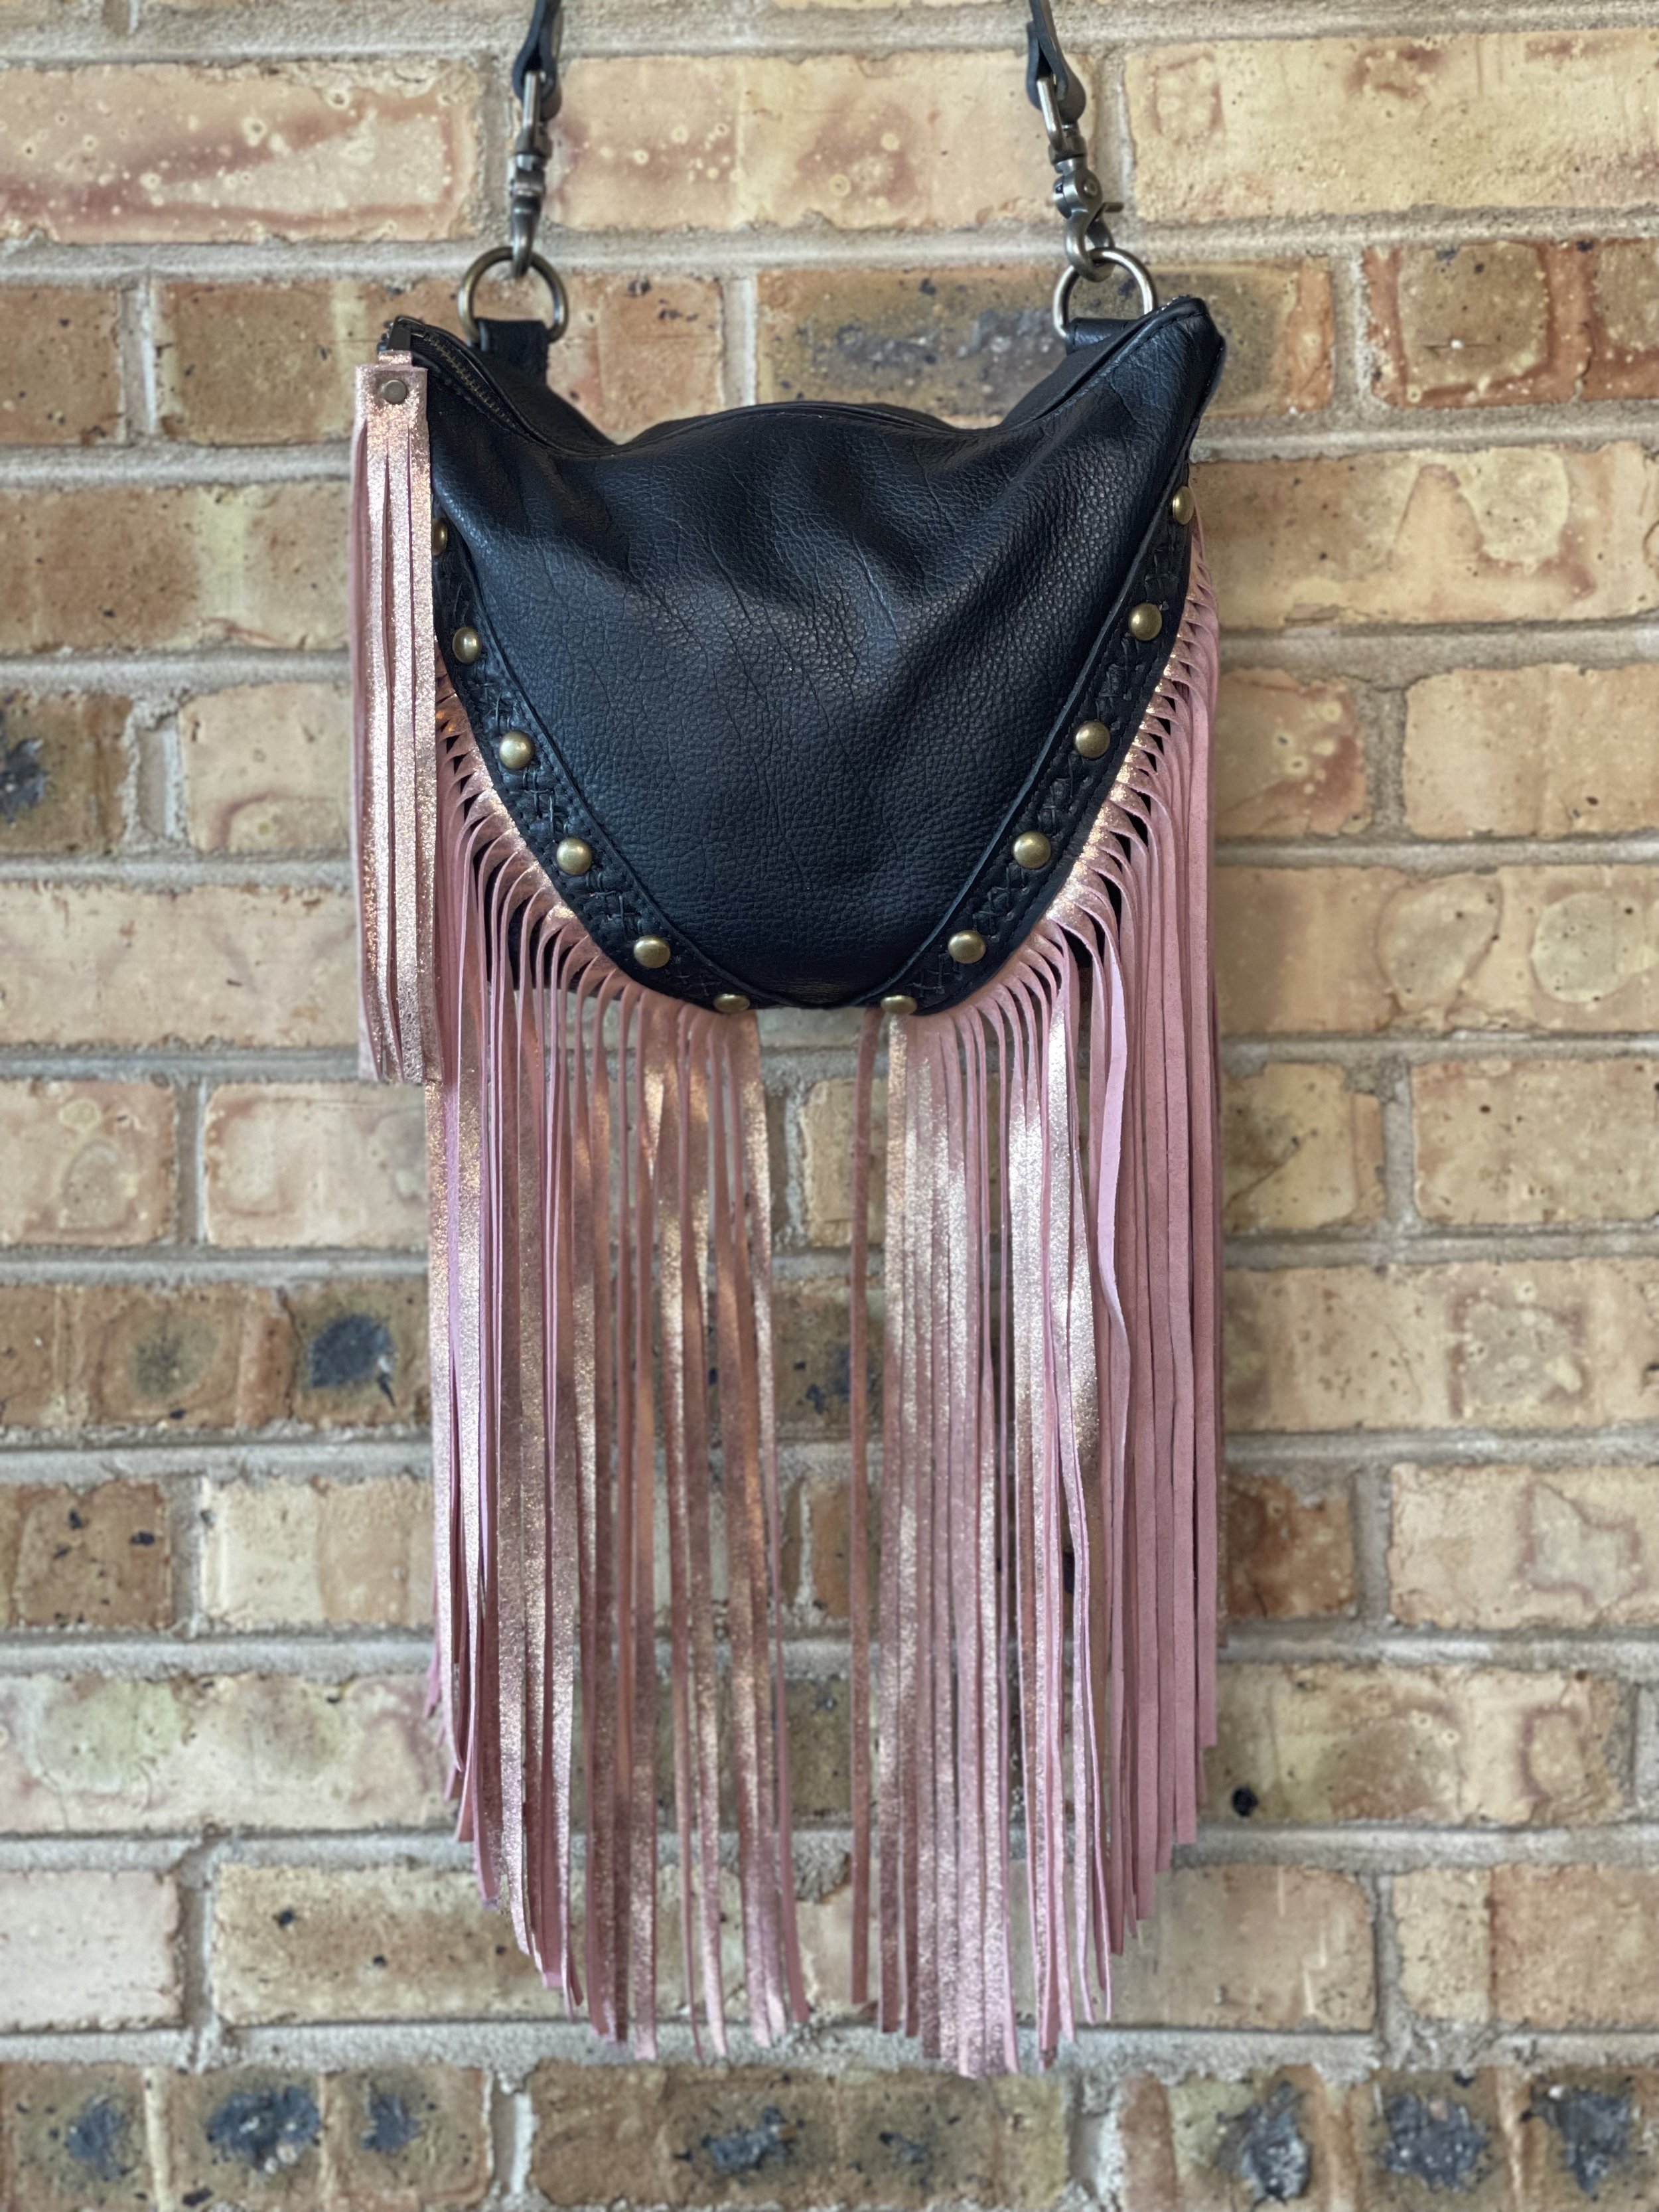 XL Radley Convertible Bag in Black Bison, *custom requested extra long* Pastel Glitter Rose Gold Fringe, Black Criss Cross Handstitching, and Studs